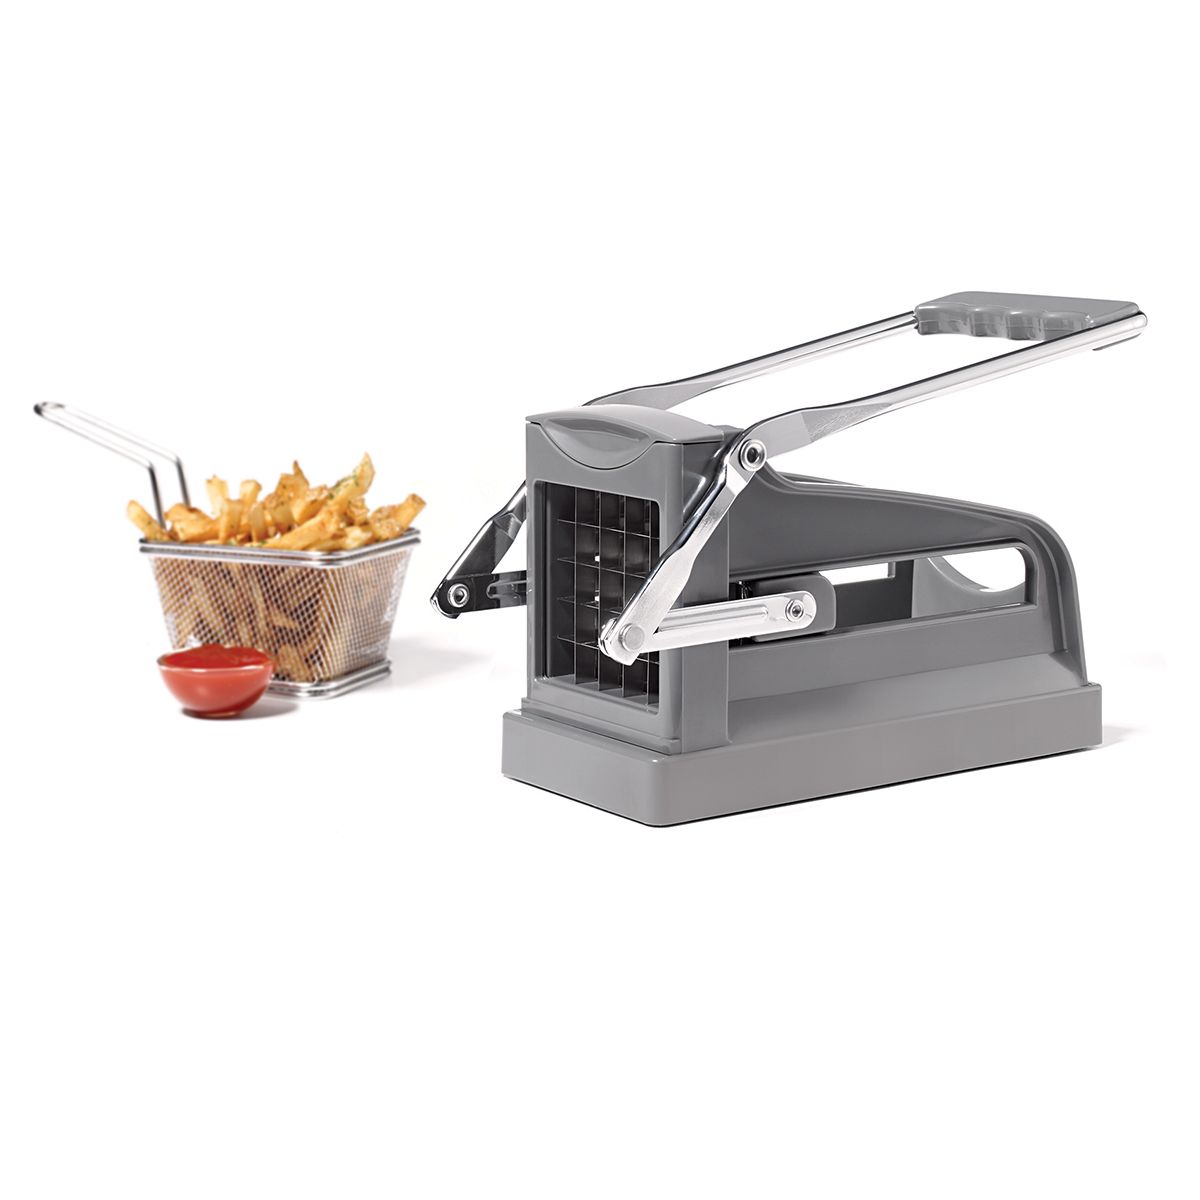 Fstcrt Electric French Fry Cutter, French Fry Cutter Stainless Steel with 1/2 & 3/8 inch Blade, Vegetable Cutter, Professional Commercial and